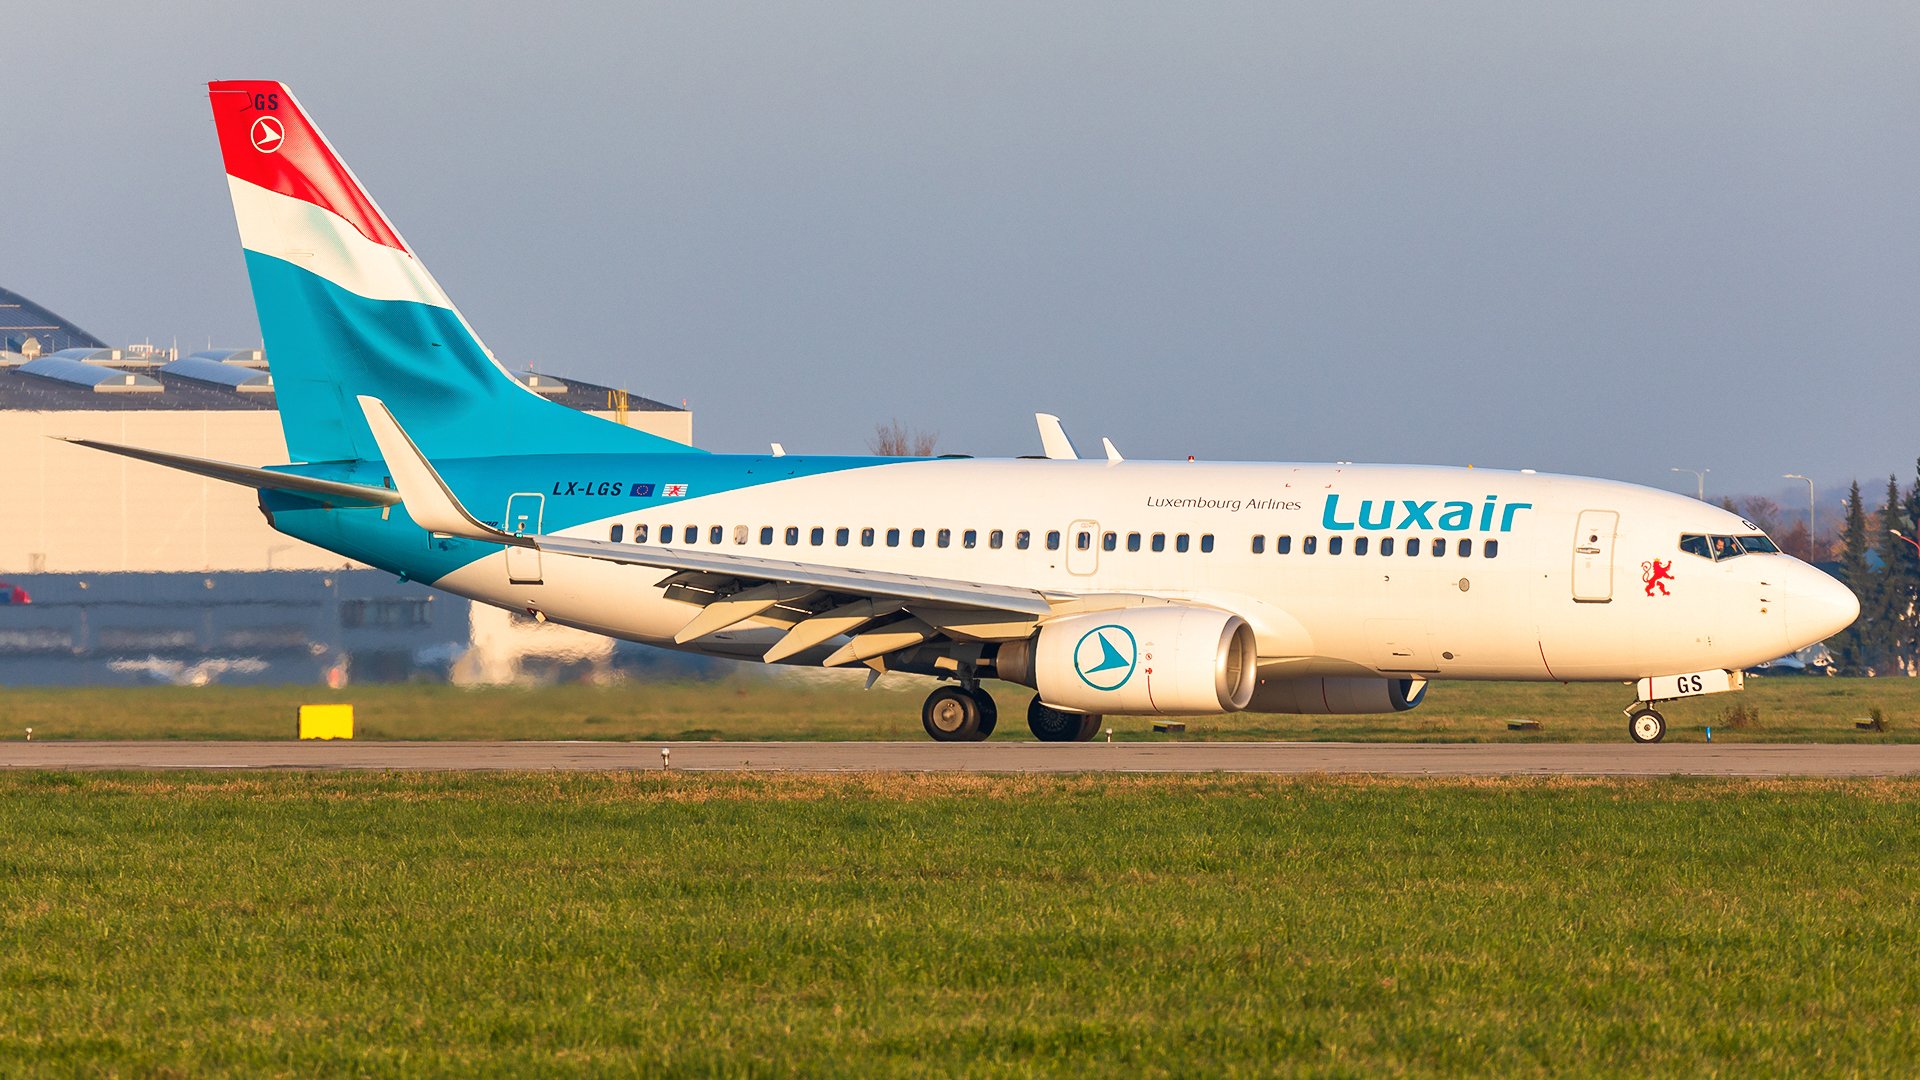 JOB AIR TECHNIC WELCOMED THE NEW CUSTOMER - LUXAIR